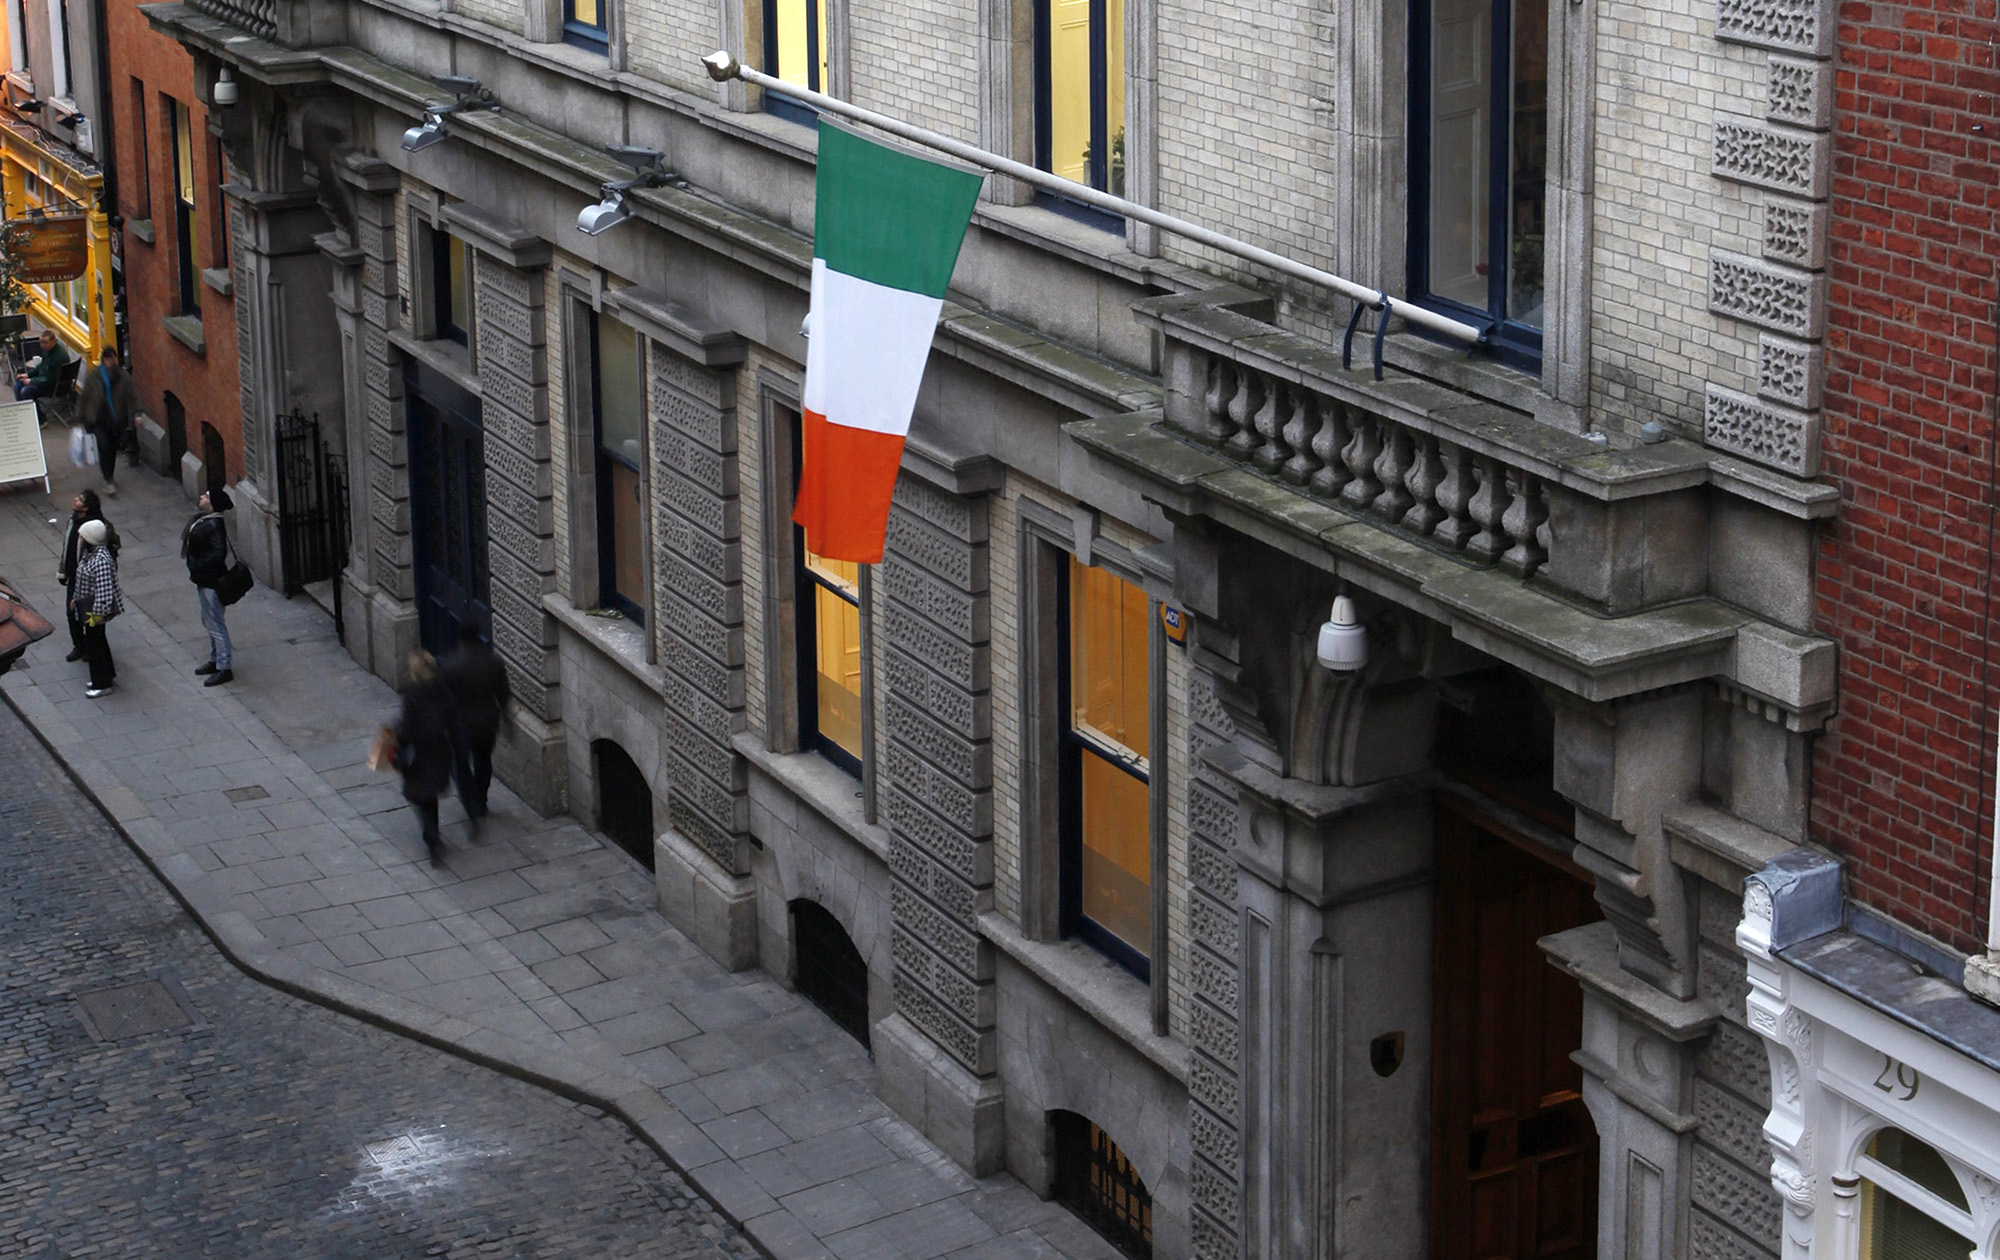 The Irish national flag flies from the flagpole at the Irish Stock Exchange in Dublin.